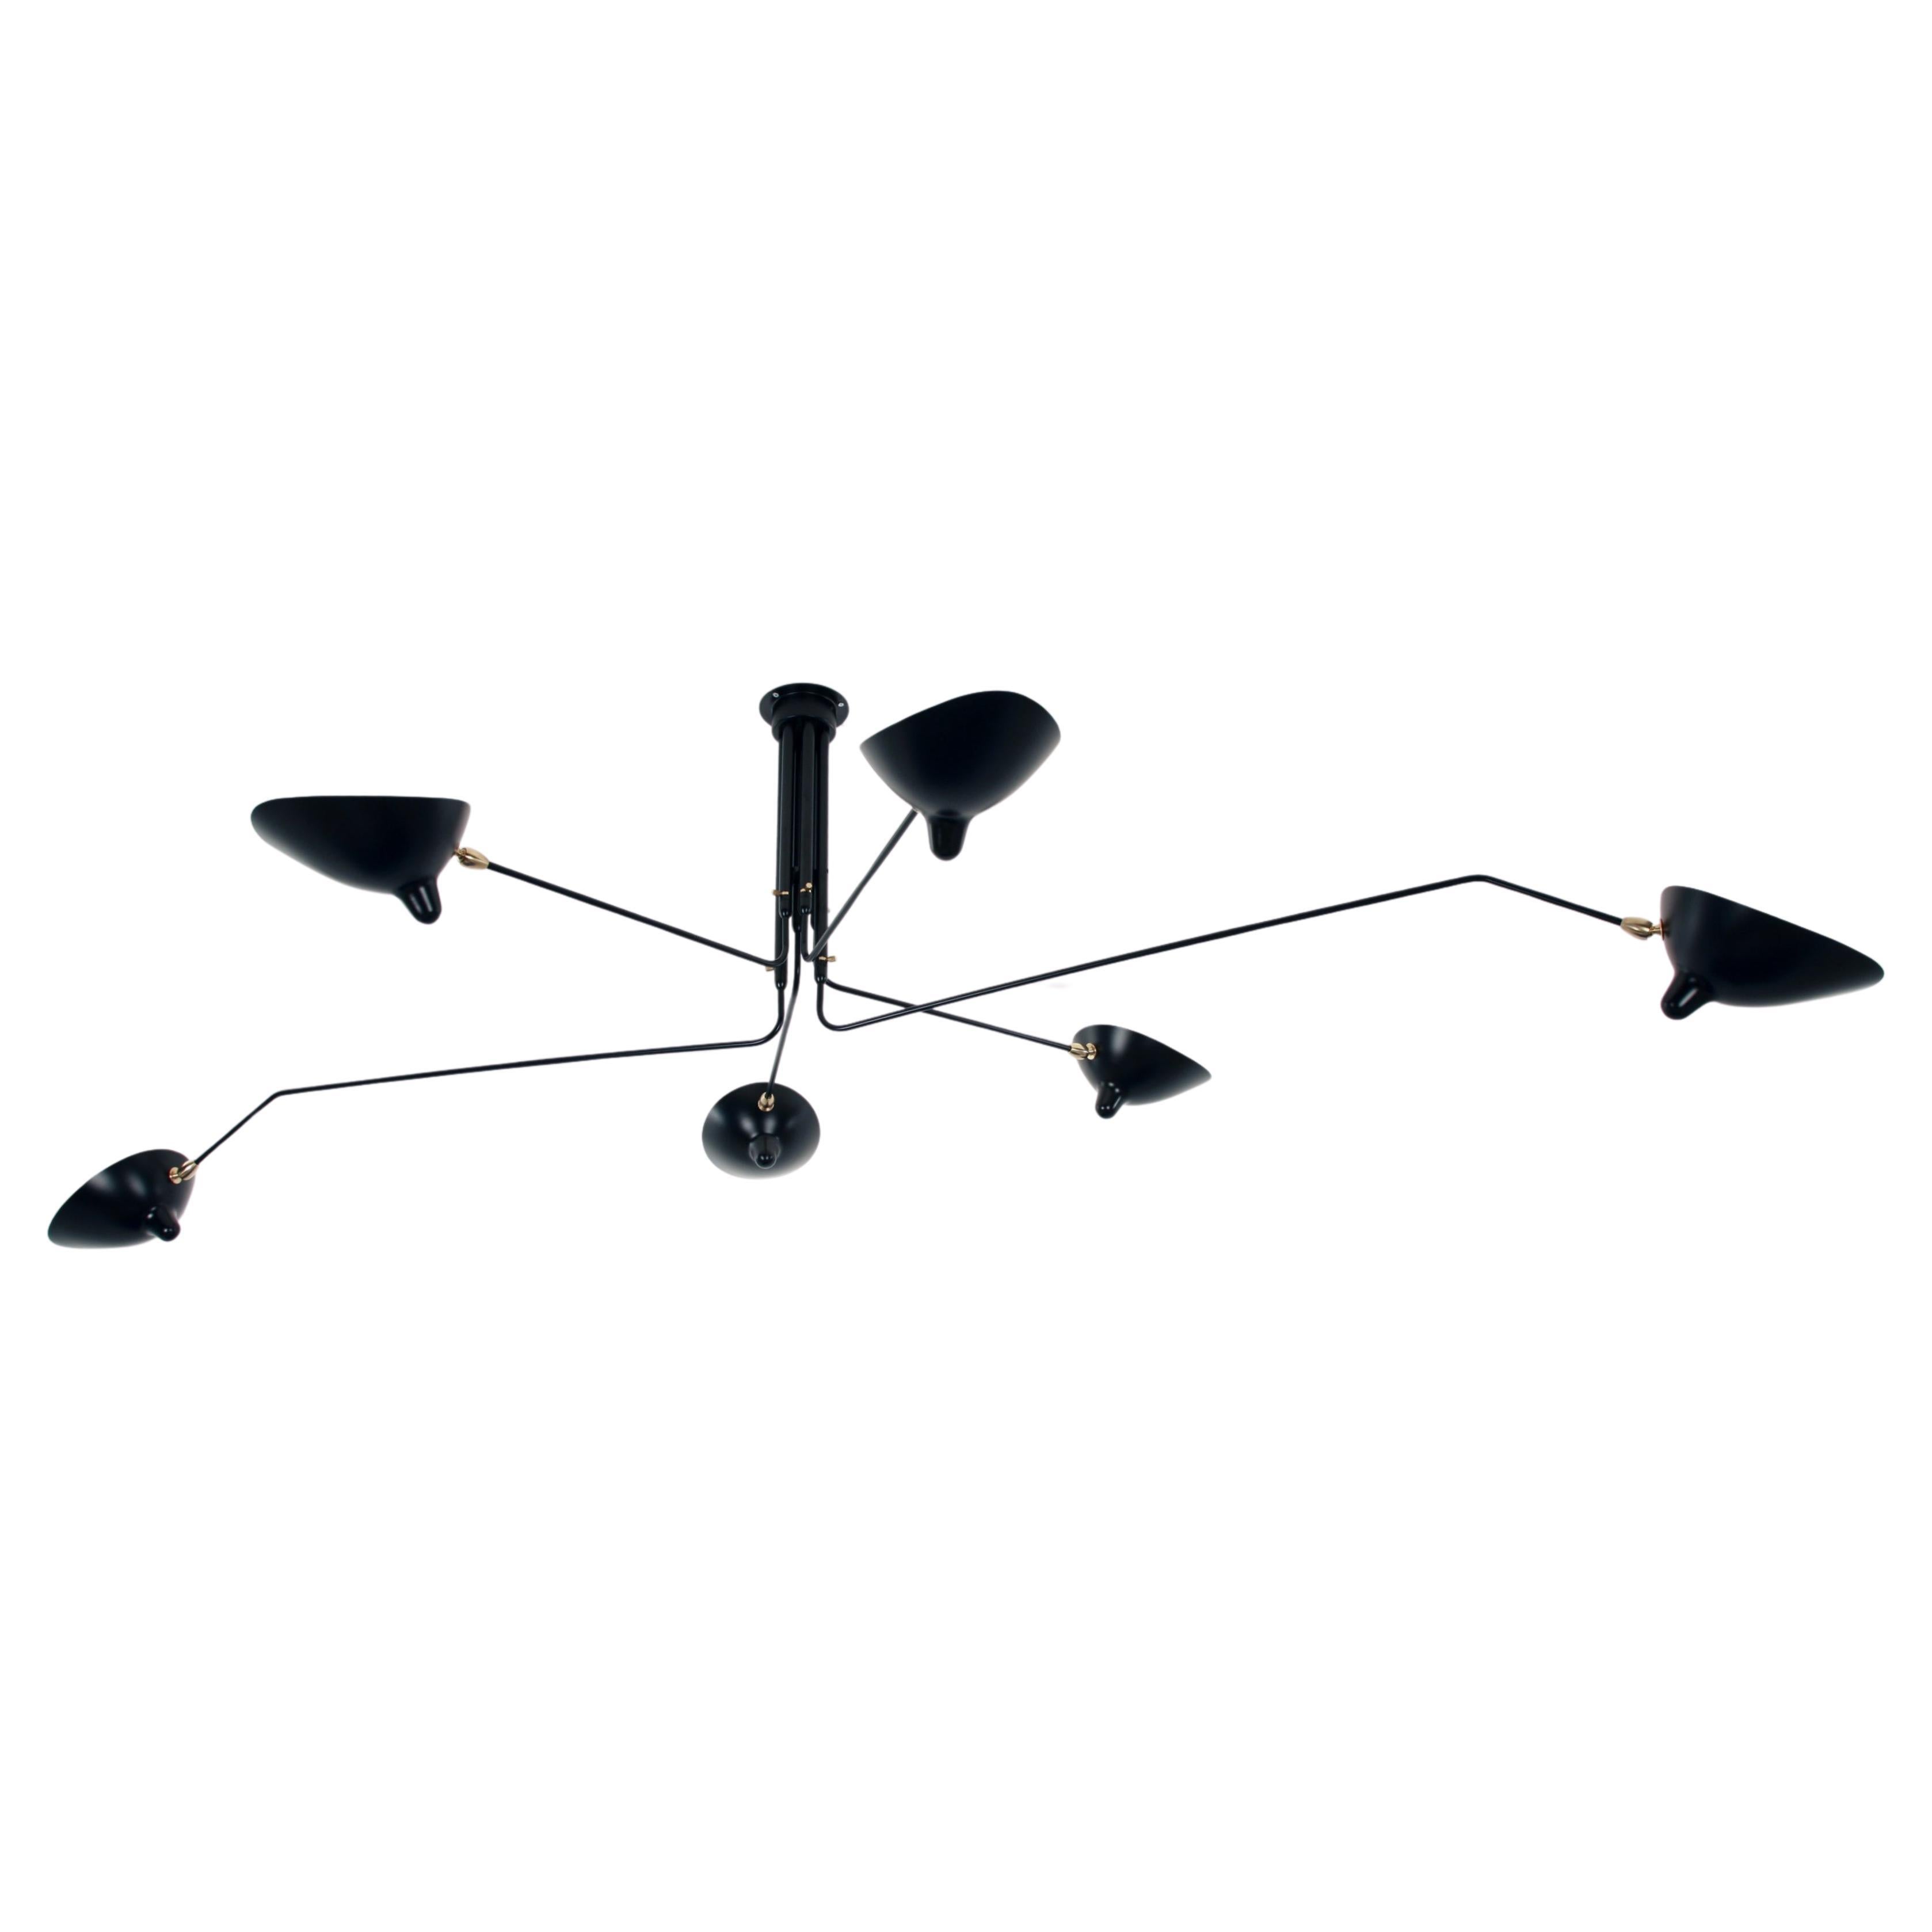 Serge Mouille - Ceiling Lamp 6 Rotating Arms - DROP, ARM LENGTH CUSTOMIZABLE! For Sale